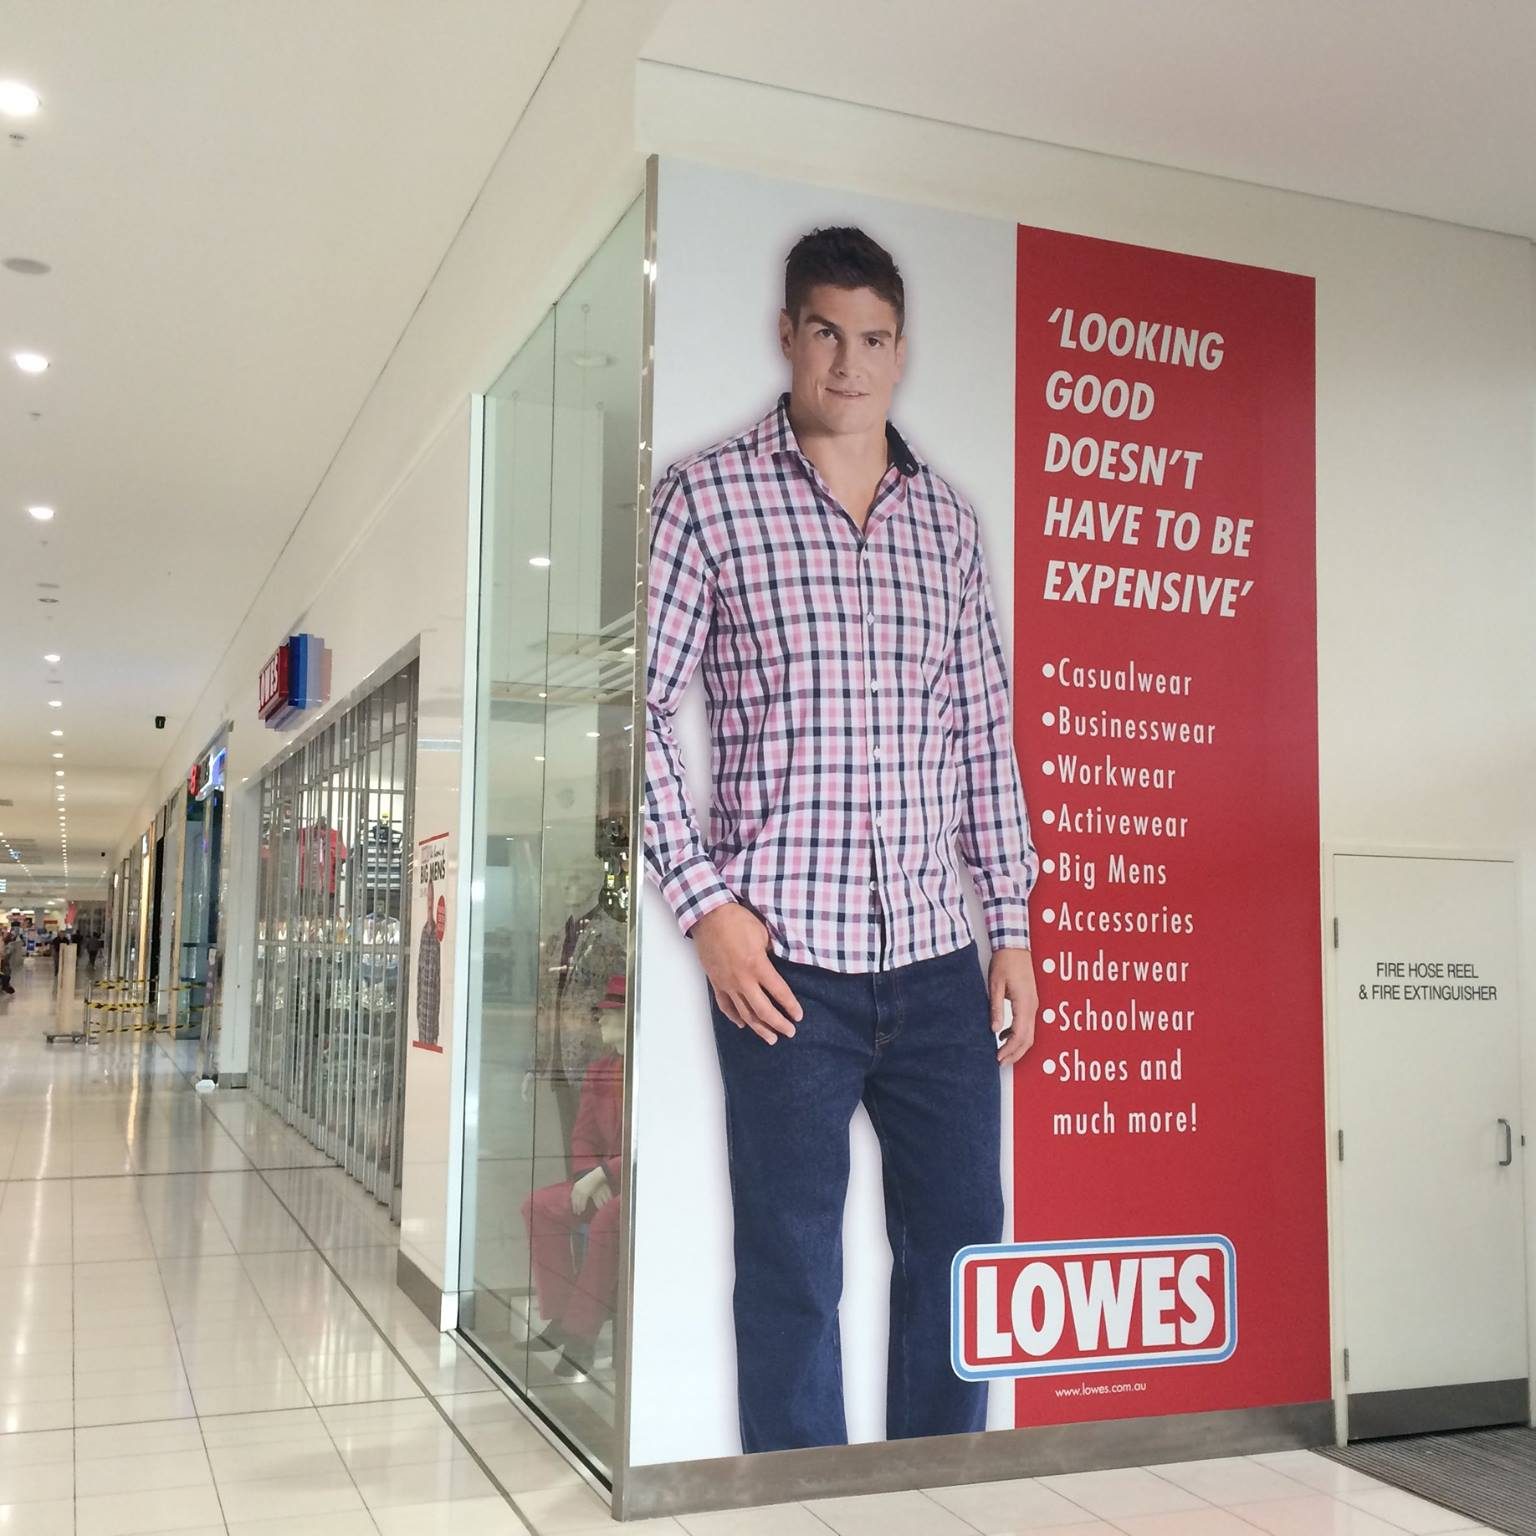 Looking good doesn't have to be expensive. Make an impact with shopfront signage